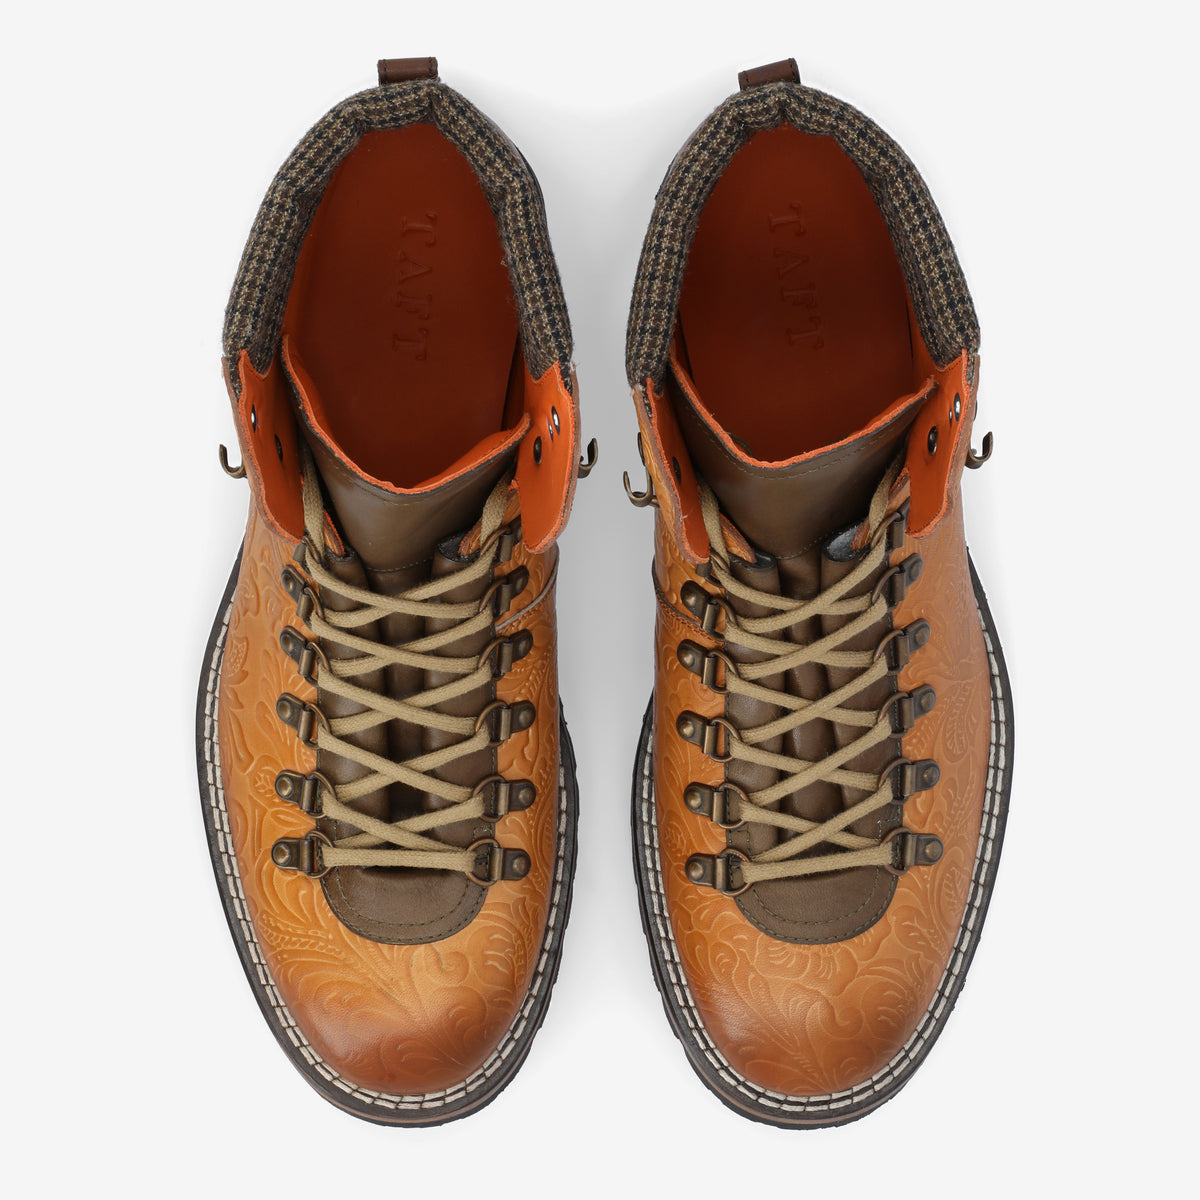 The Viking Boot in Brown Floral | TAFT